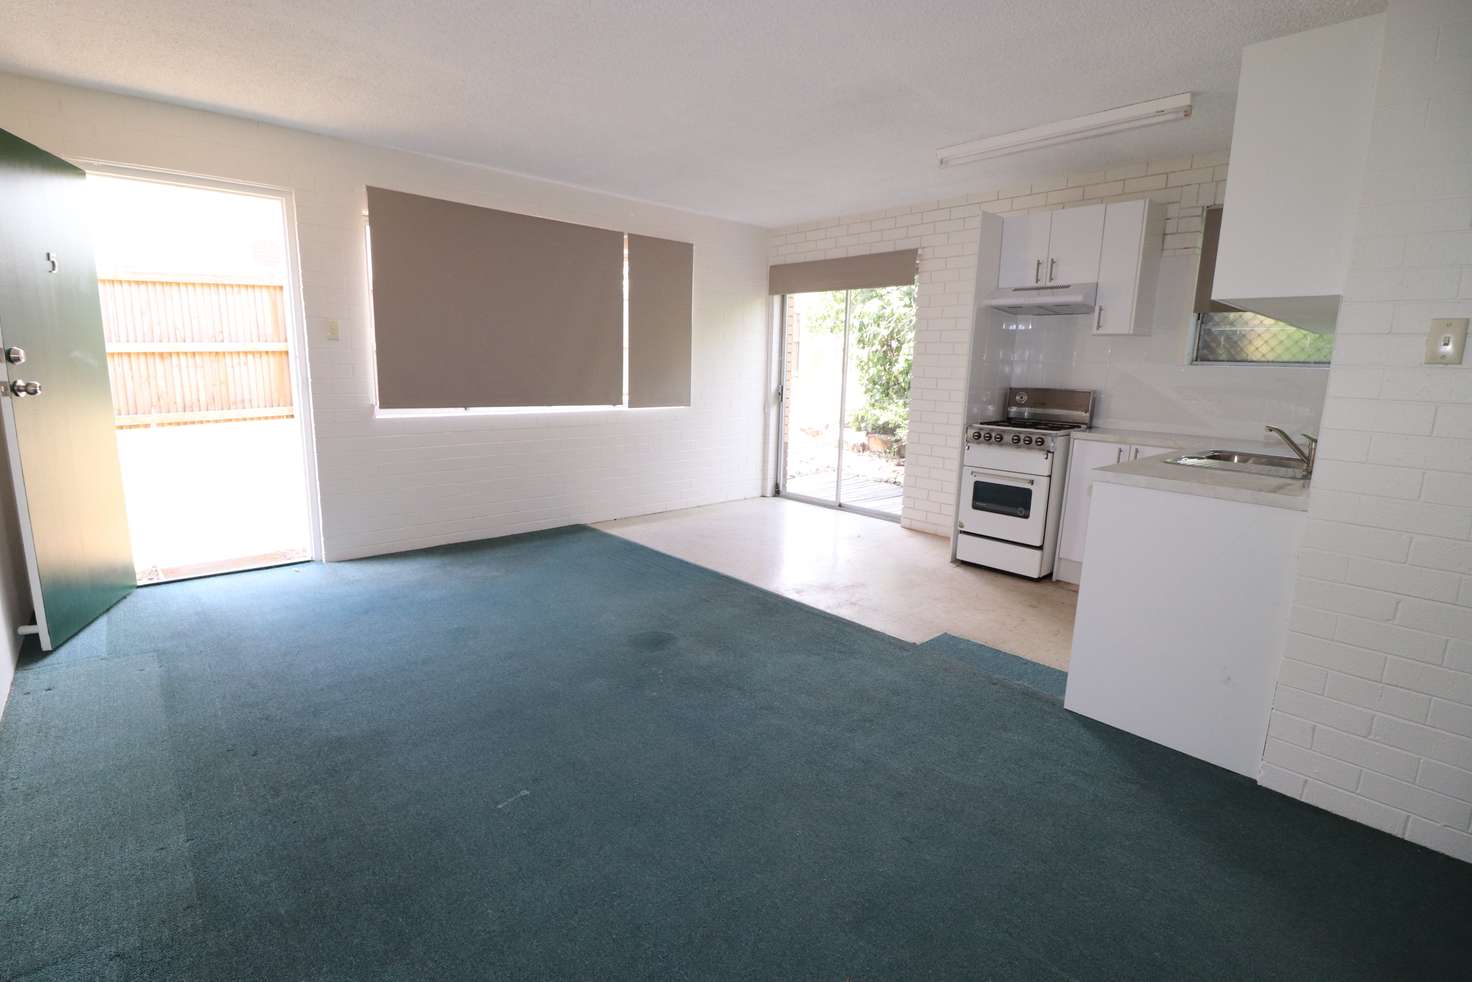 Main view of Homely unit listing, 5/29 Galway St, Greenslopes QLD 4120